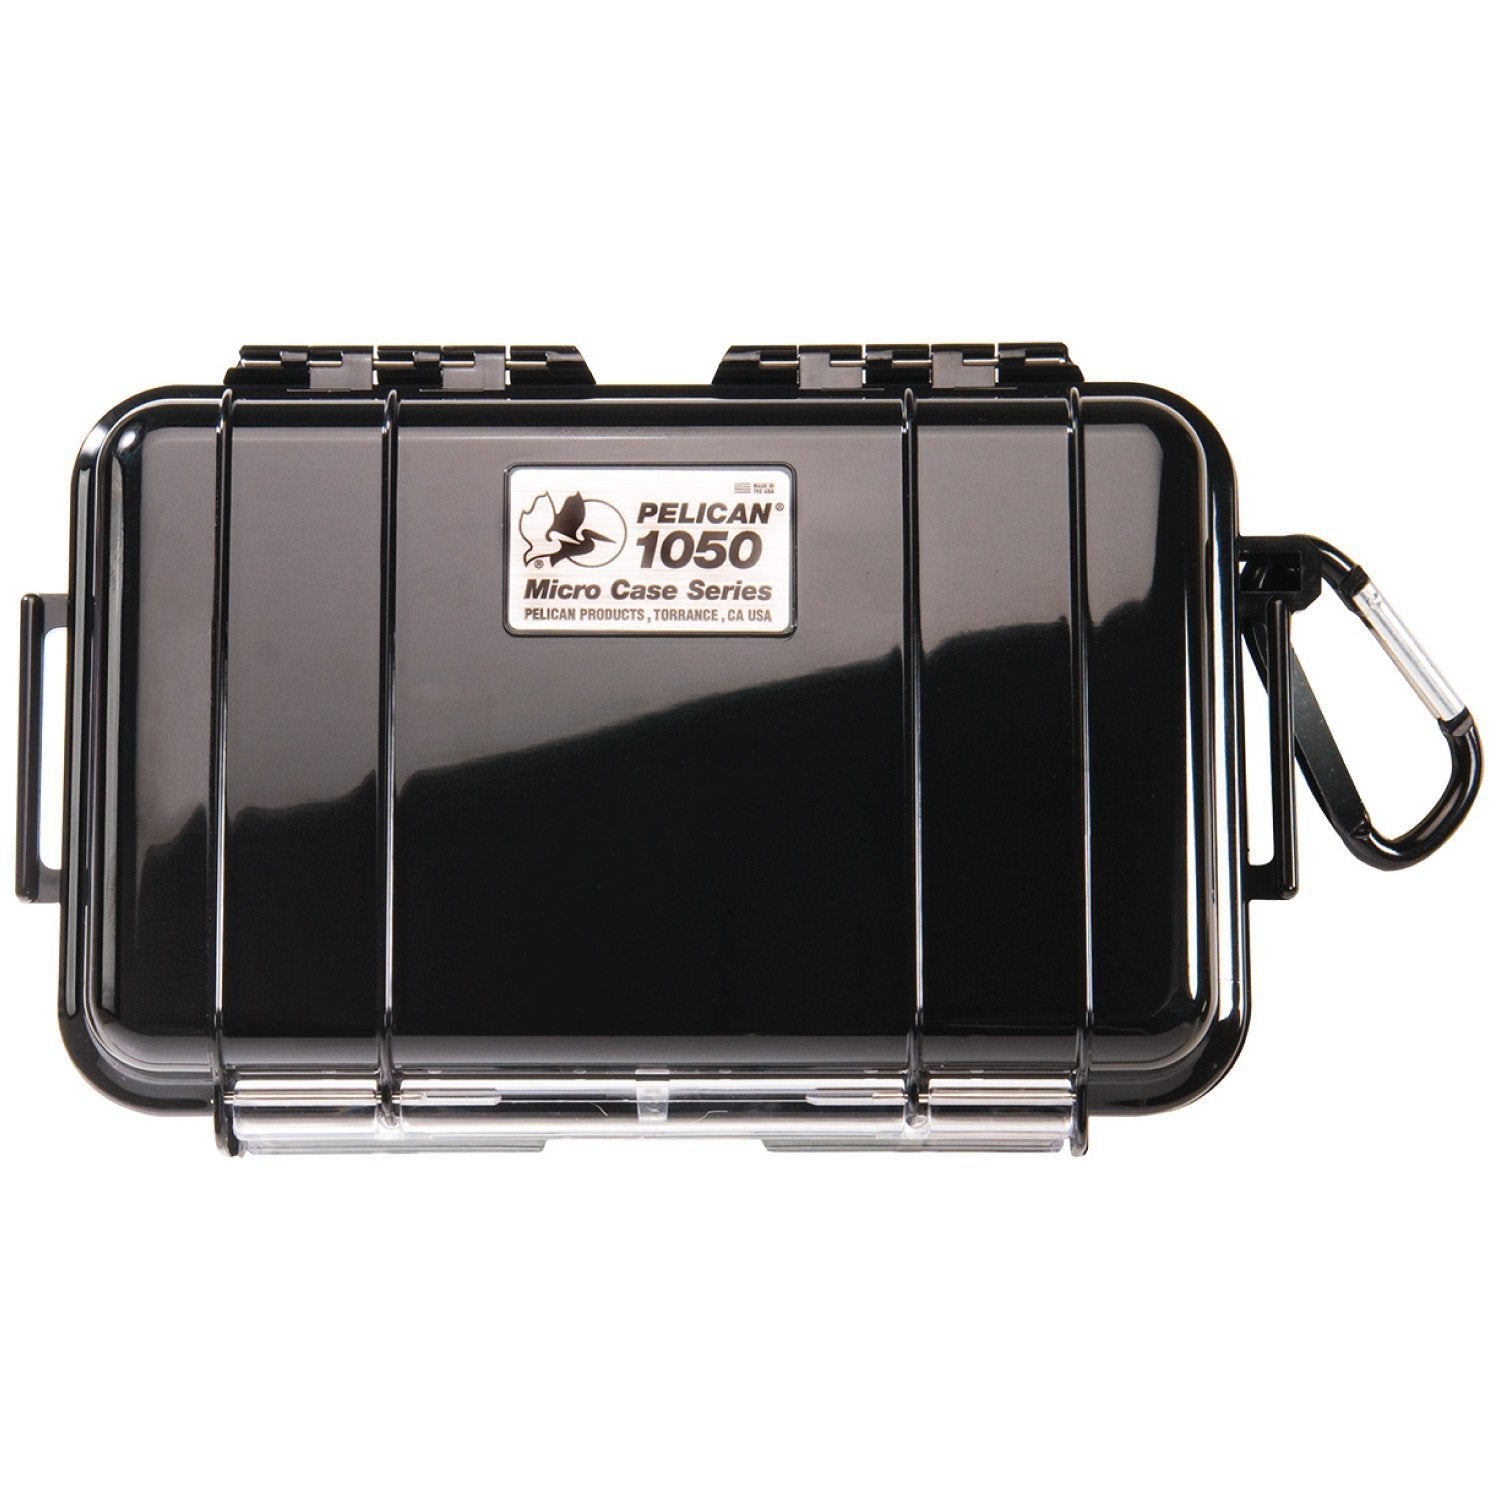 Pelican 1050 Micro Case Cases Pelican Products Black Shell with Black Liner Tactical Gear Supplier Tactical Distributors Australia